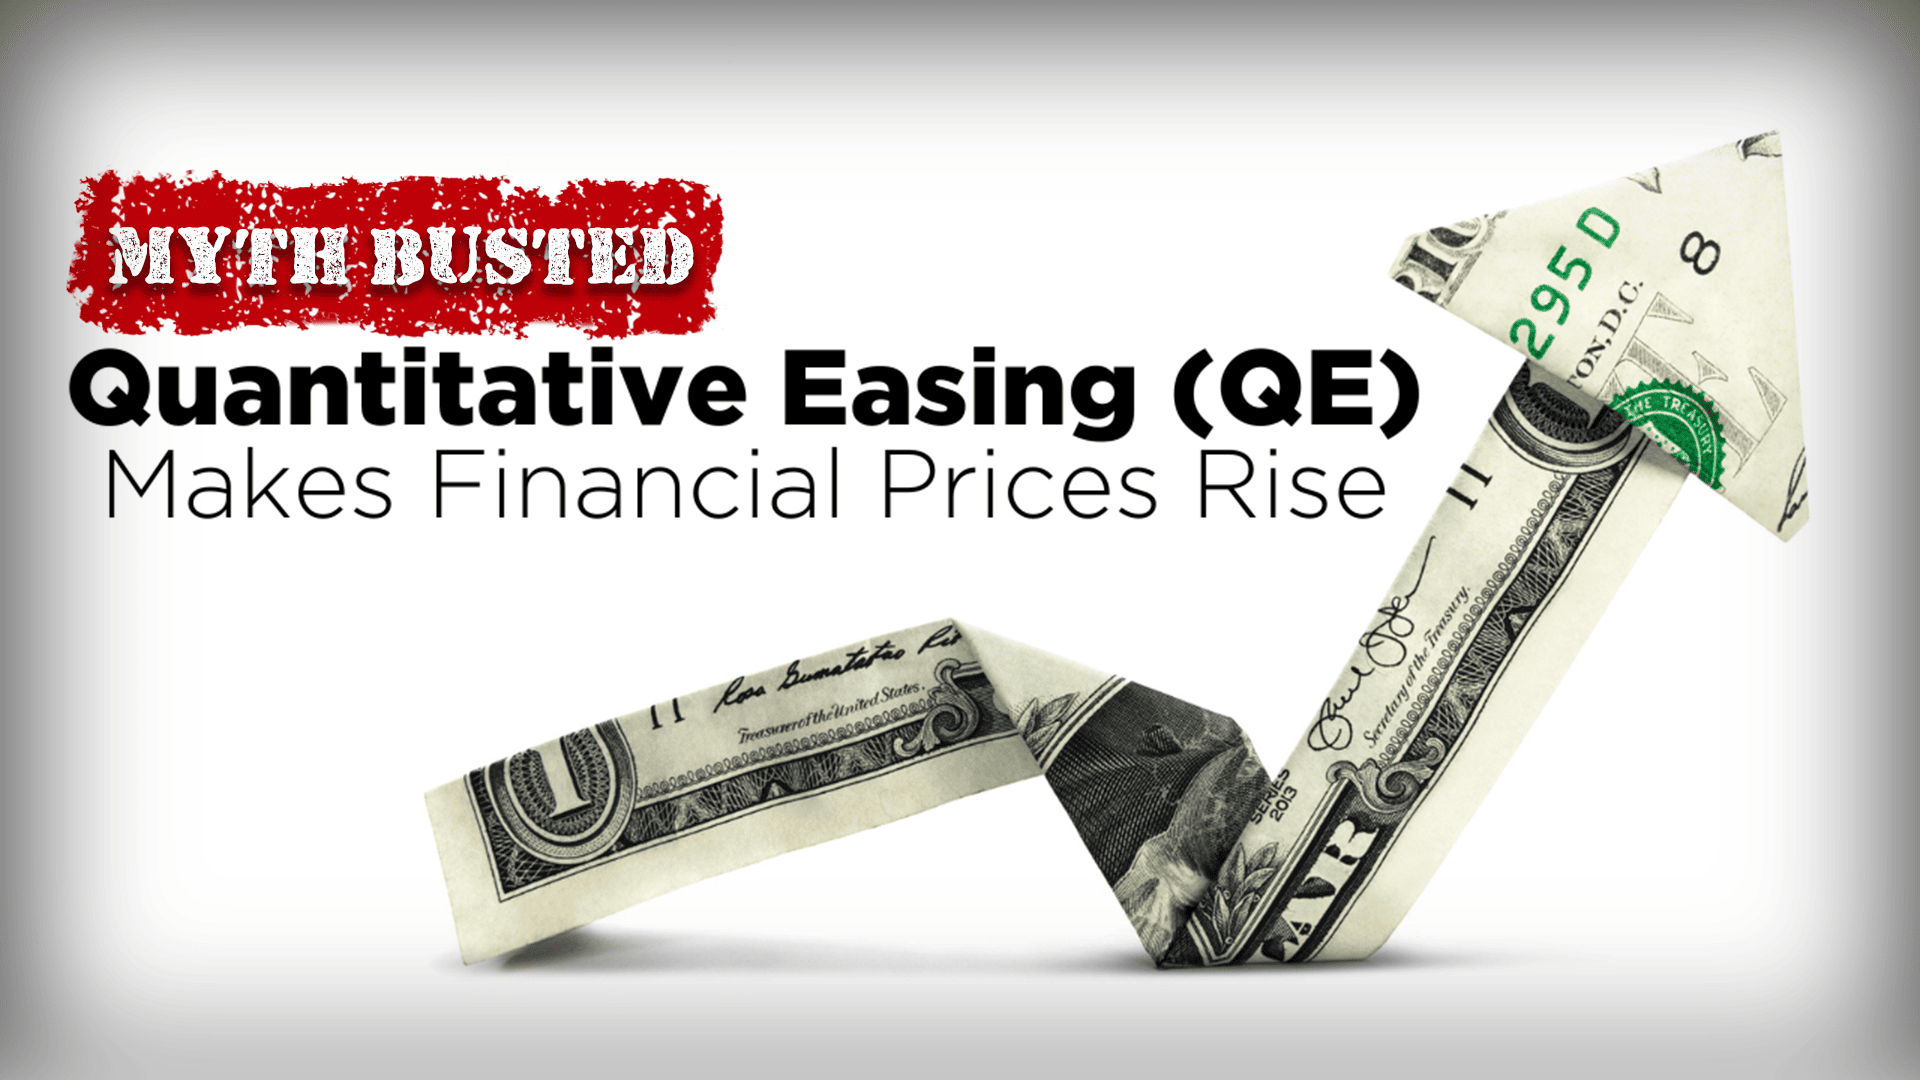 Does Quantitative Easing (QE) Make Financial Prices Rise?